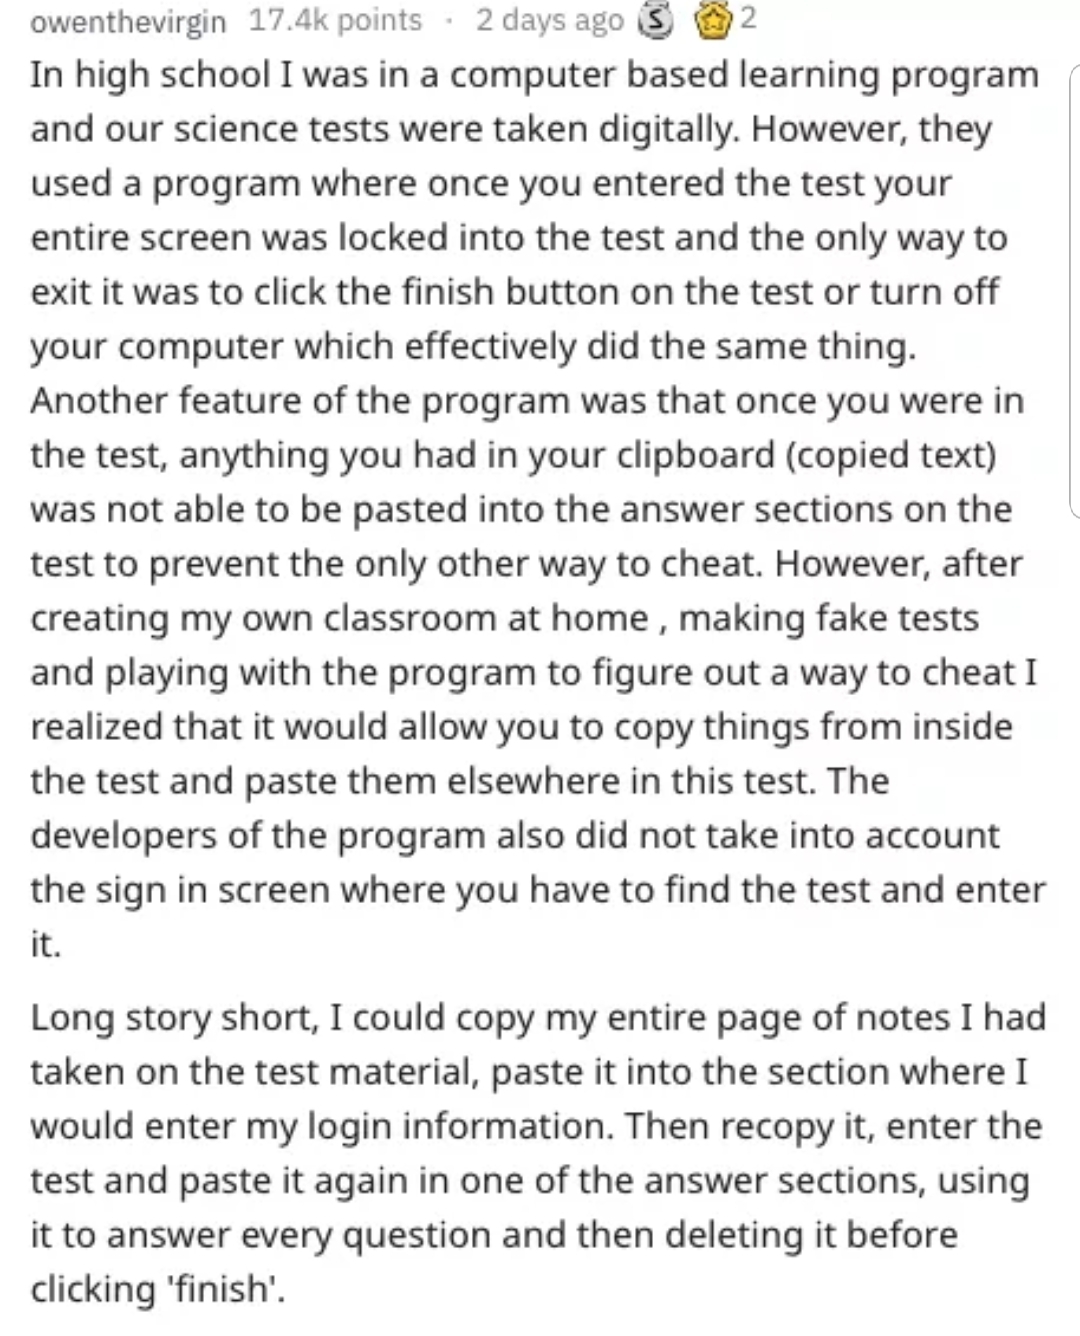 dafuq did i just read - owenthevirgin points 2 days ago s 2 In high school I was in a computer based learning program and our science tests were taken digitally. However, they used a program where once you entered the test your entire screen was locked in